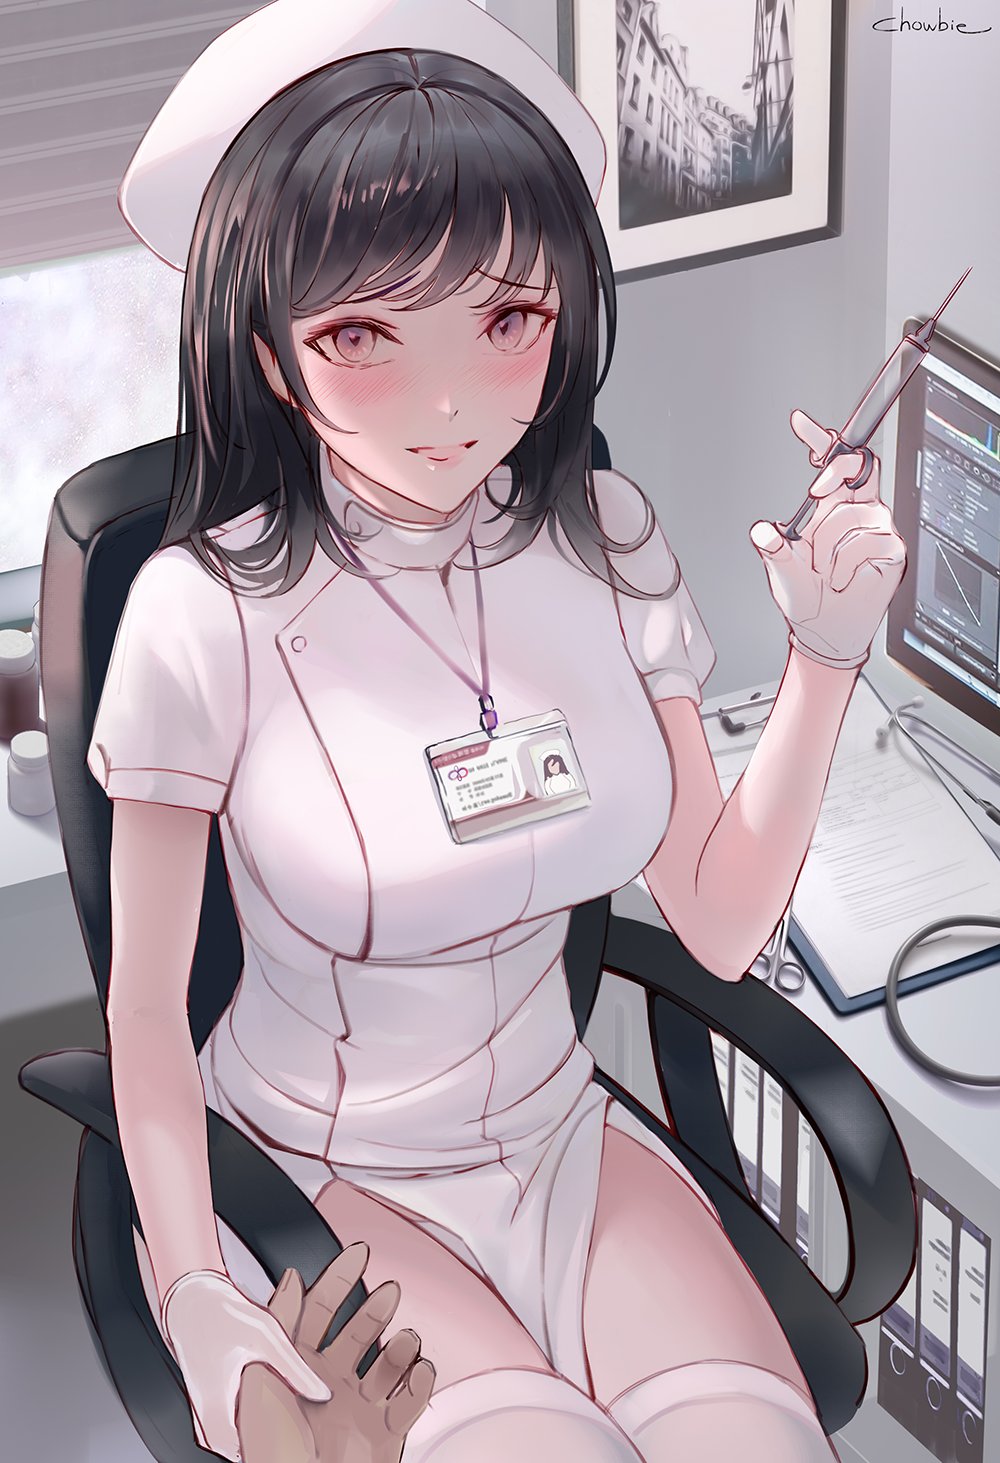 1girl black_hair blush breasts chair chowbie clipboard commentary gloves grey_eyes hat highres holding holding_hands holding_syringe id_card large_breasts looking_at_viewer medicine medium_hair monitor nurse nurse_cap office office_chair original parted_lips rubber_gloves shelf stethoscope syringe thigh-highs thighs white_legwear